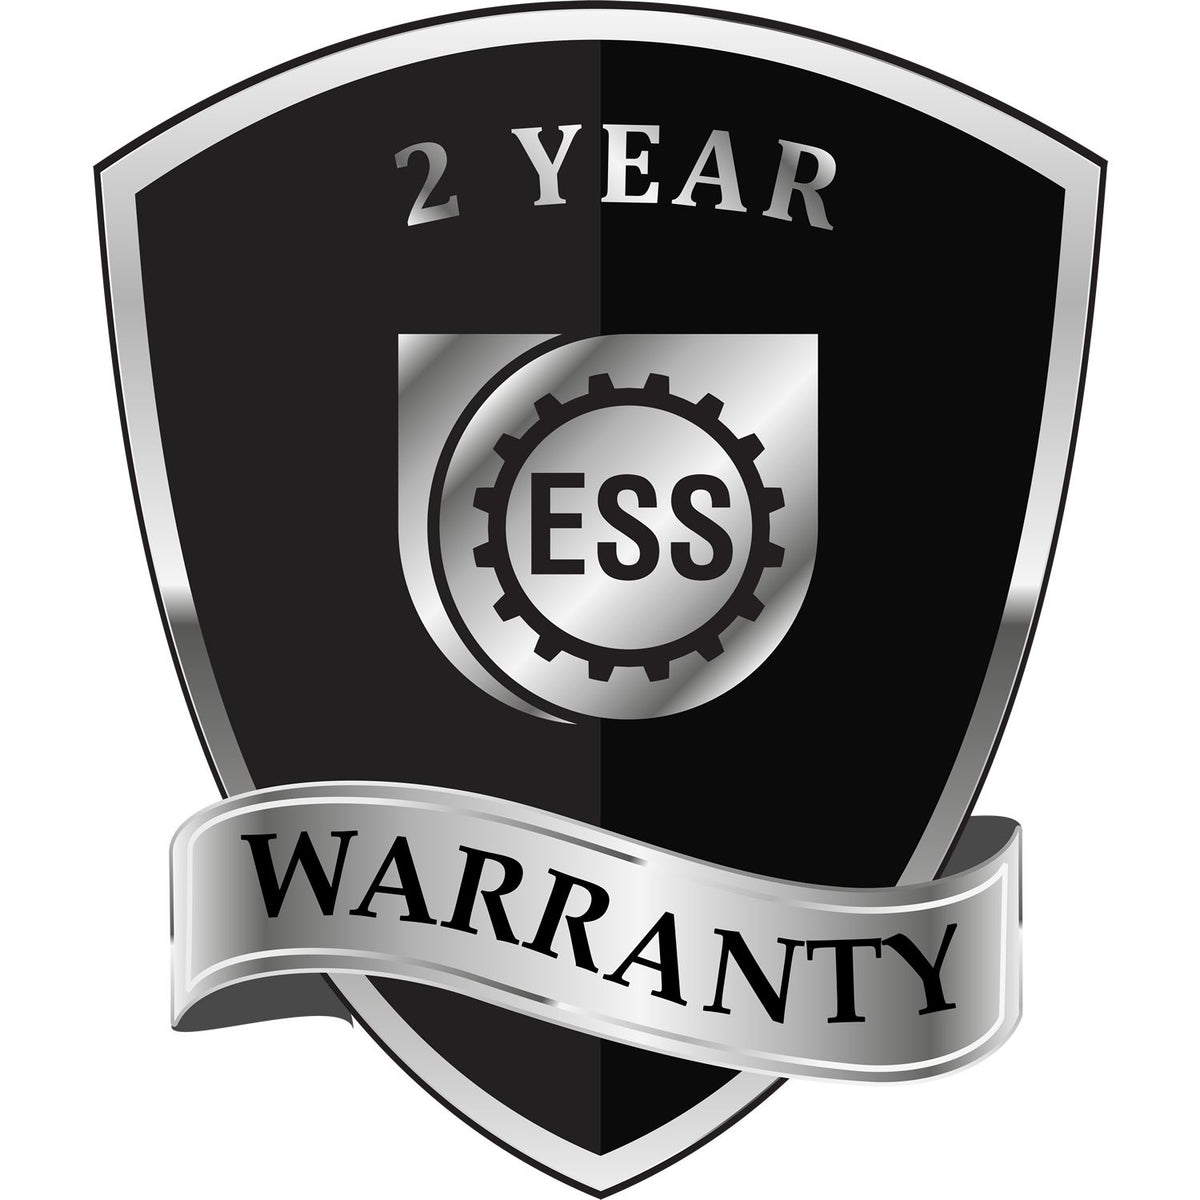 A black and silver badge or emblem showing warranty information for the Soft Kentucky Professional Geologist Seal